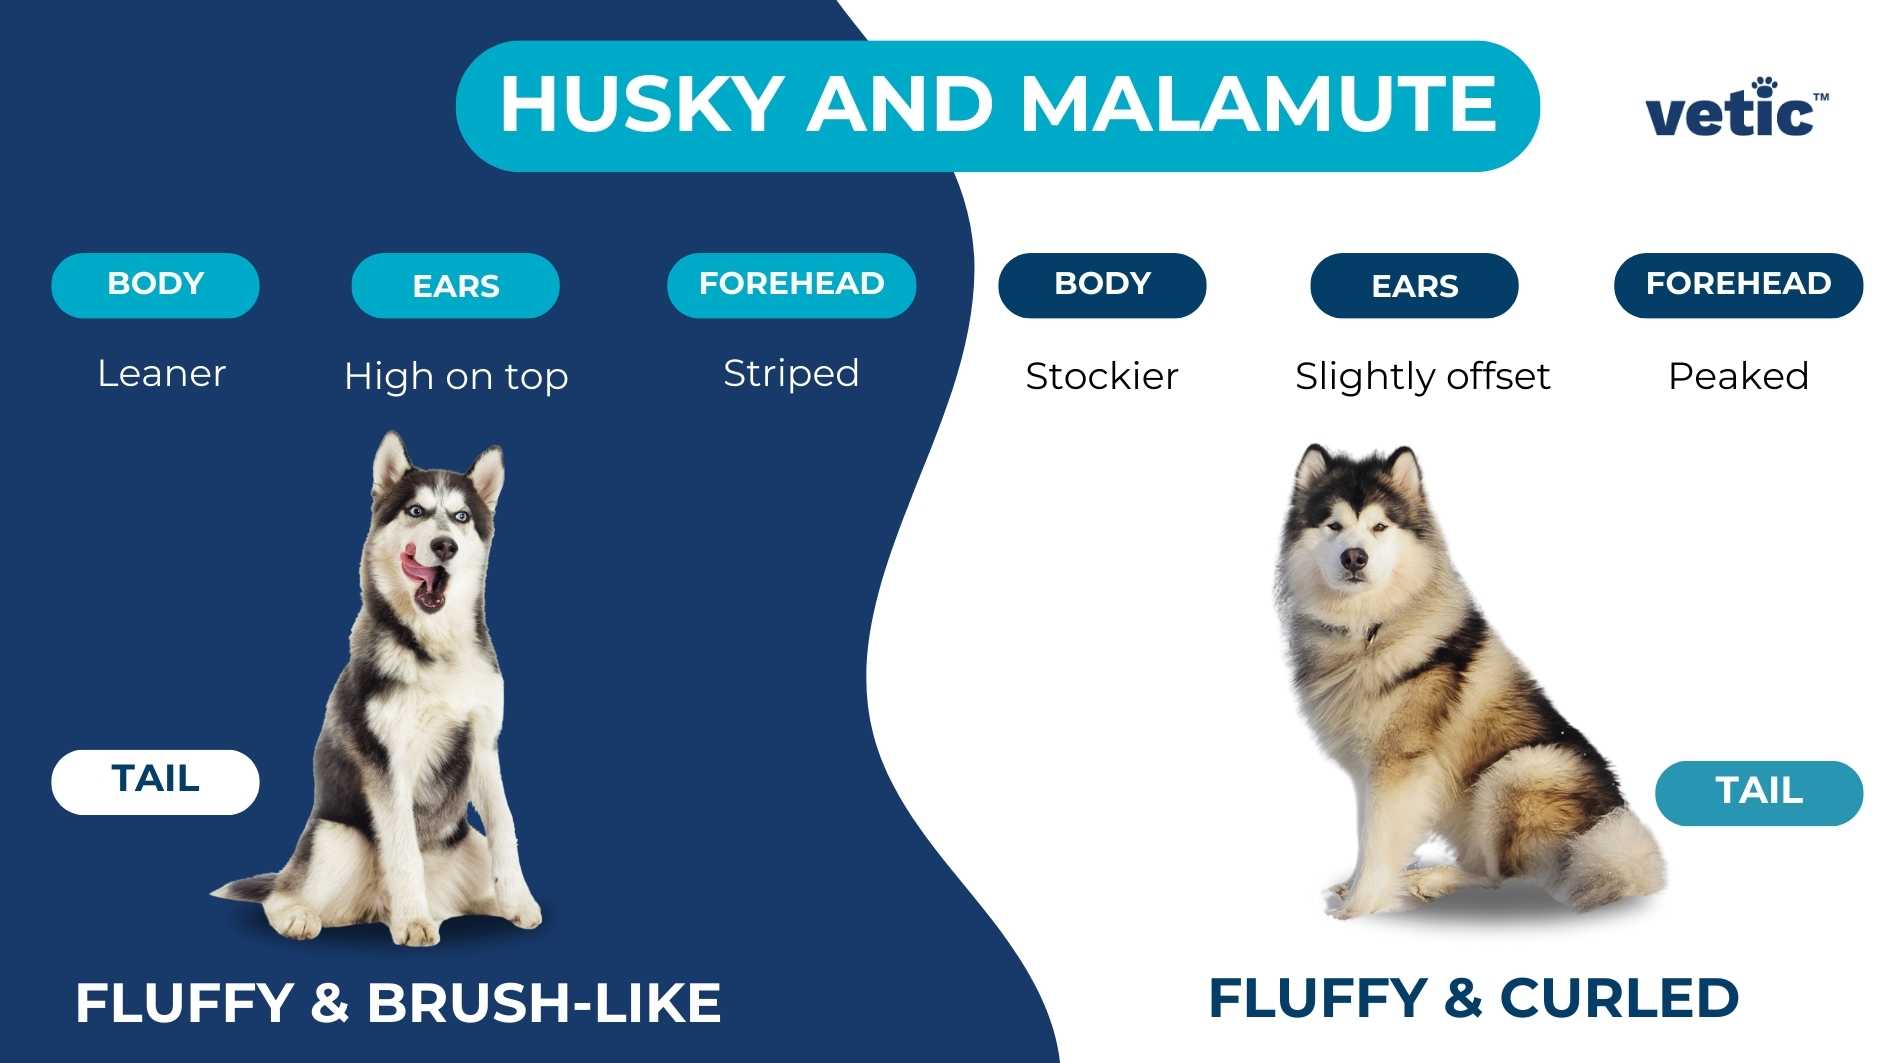 The infographic compares the physical characteristics of Husky and Malamute dogs, highlighting their differences in body, ears, forehead, and tail. It uses a blue background with white text and pictures of both breeds. It is presented by “vetic”. The infographic shows that Huskies are leaner, have ears high on top, have a striped forehead, and have a fluffy and brush-like tail. Malamutes are stockier, have ears slightly offset, have a peaked forehead, and have a fluffy and curled tail. Both dogs have similar color patterns but different physical builds and features.